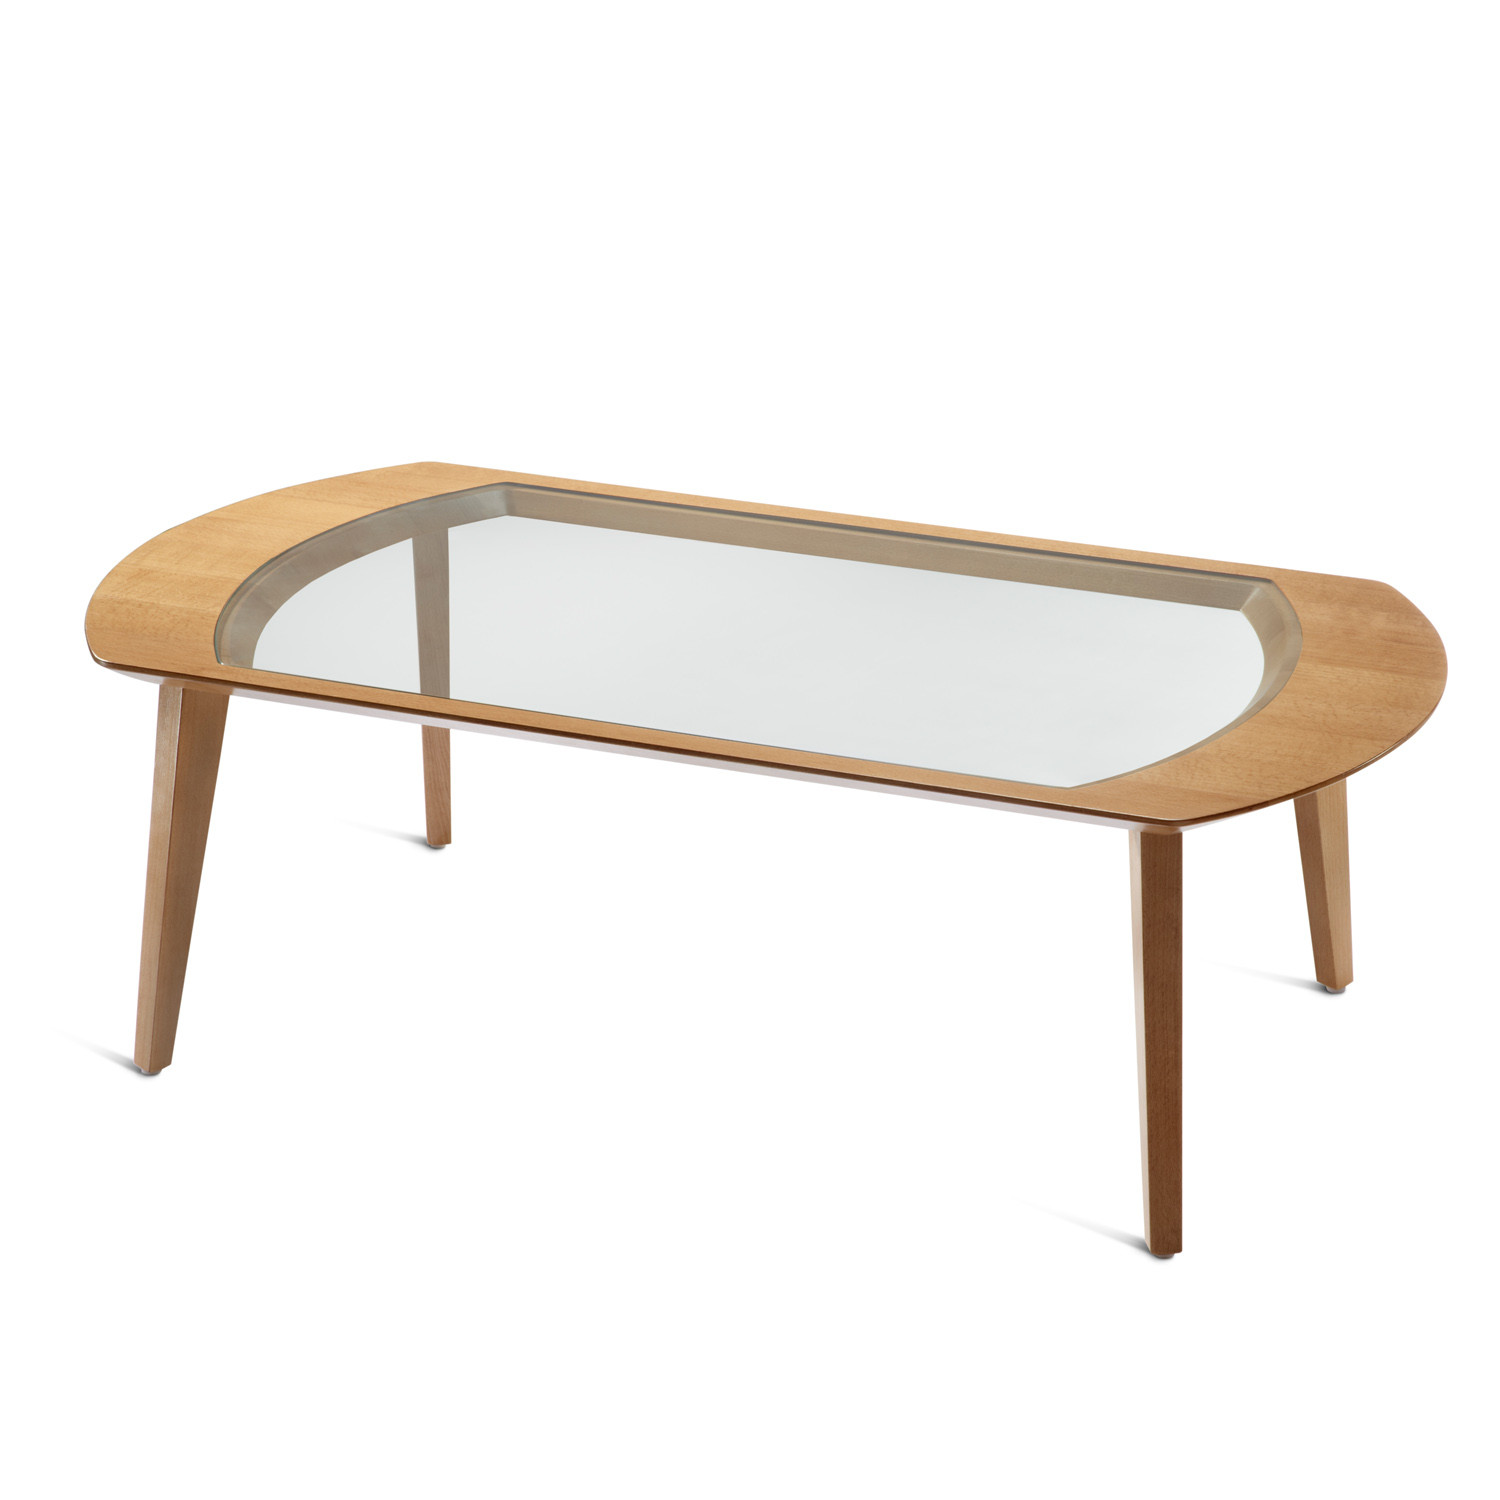 Mortimer Table with Inset Glass